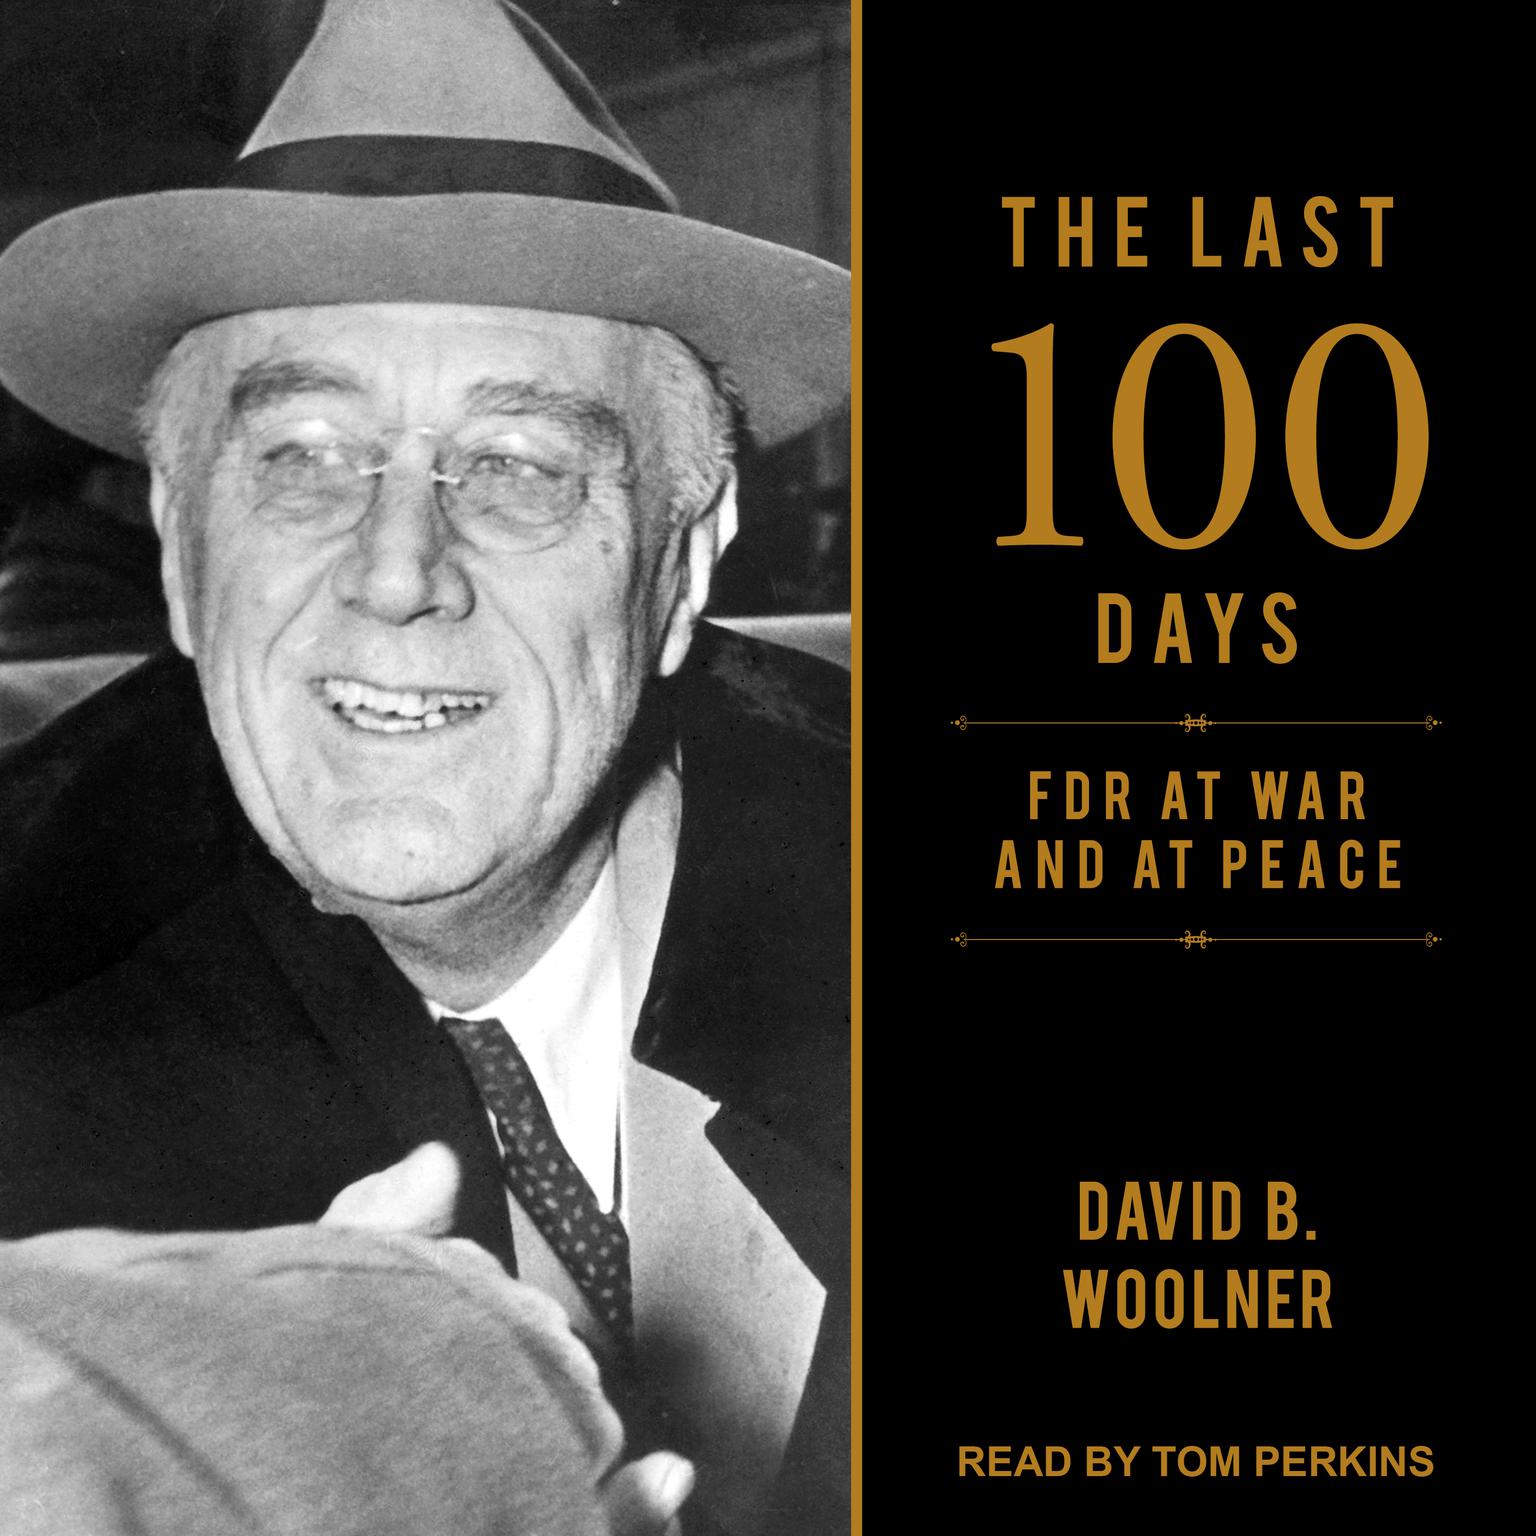 The Last 100 Days: FDR at War and at Peace Audiobook, by David B. Woolner